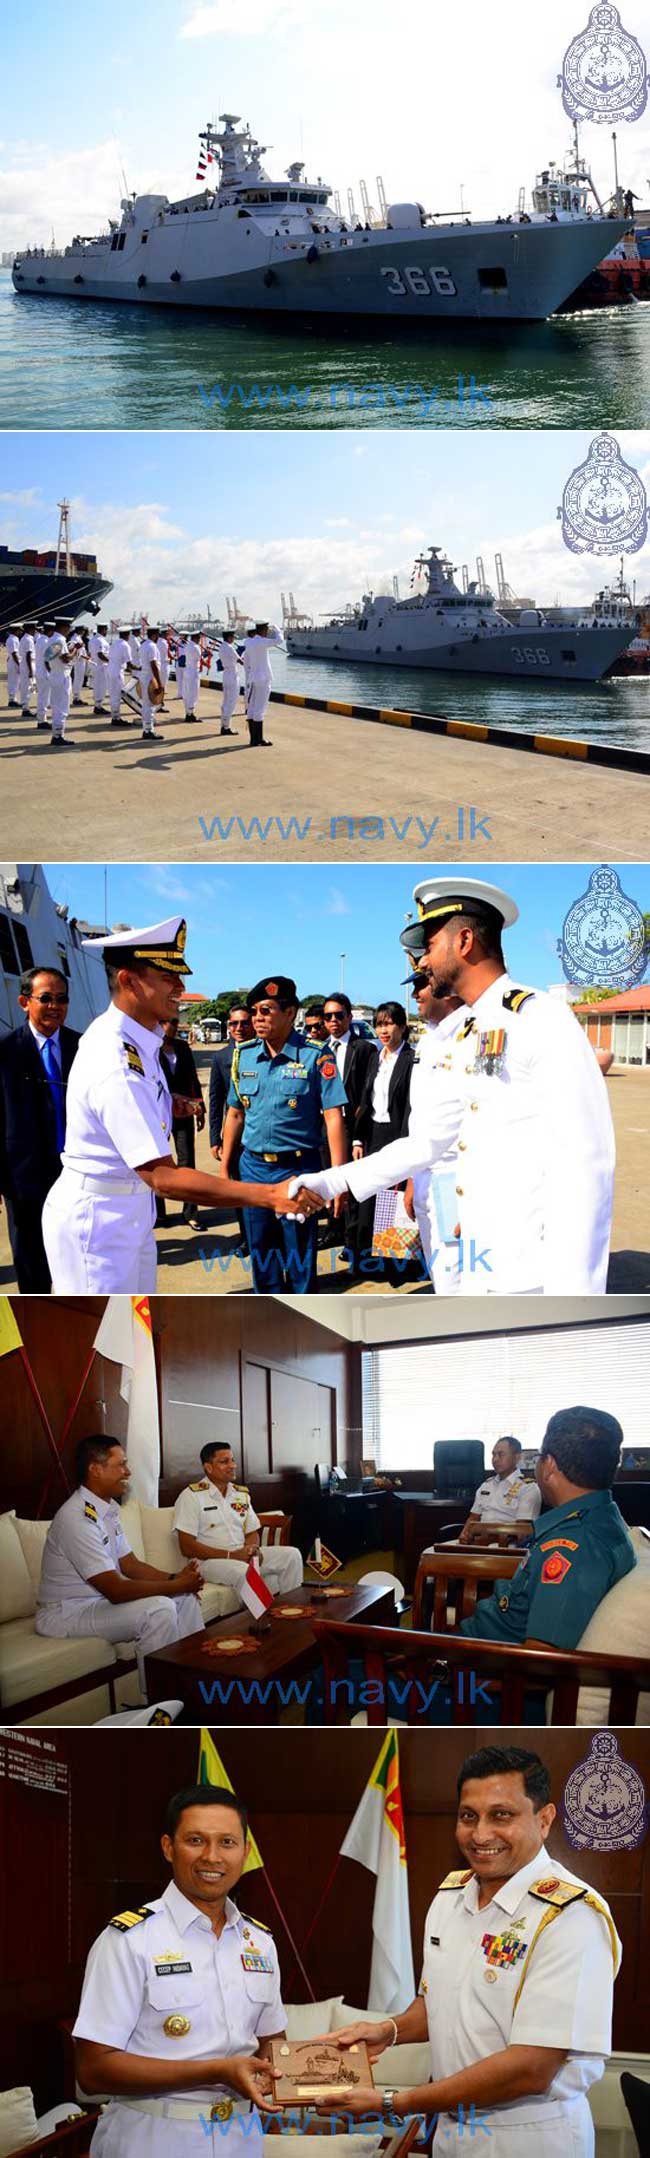 Navy welcomes Kri Sultan Hasanuddin from Indonesia